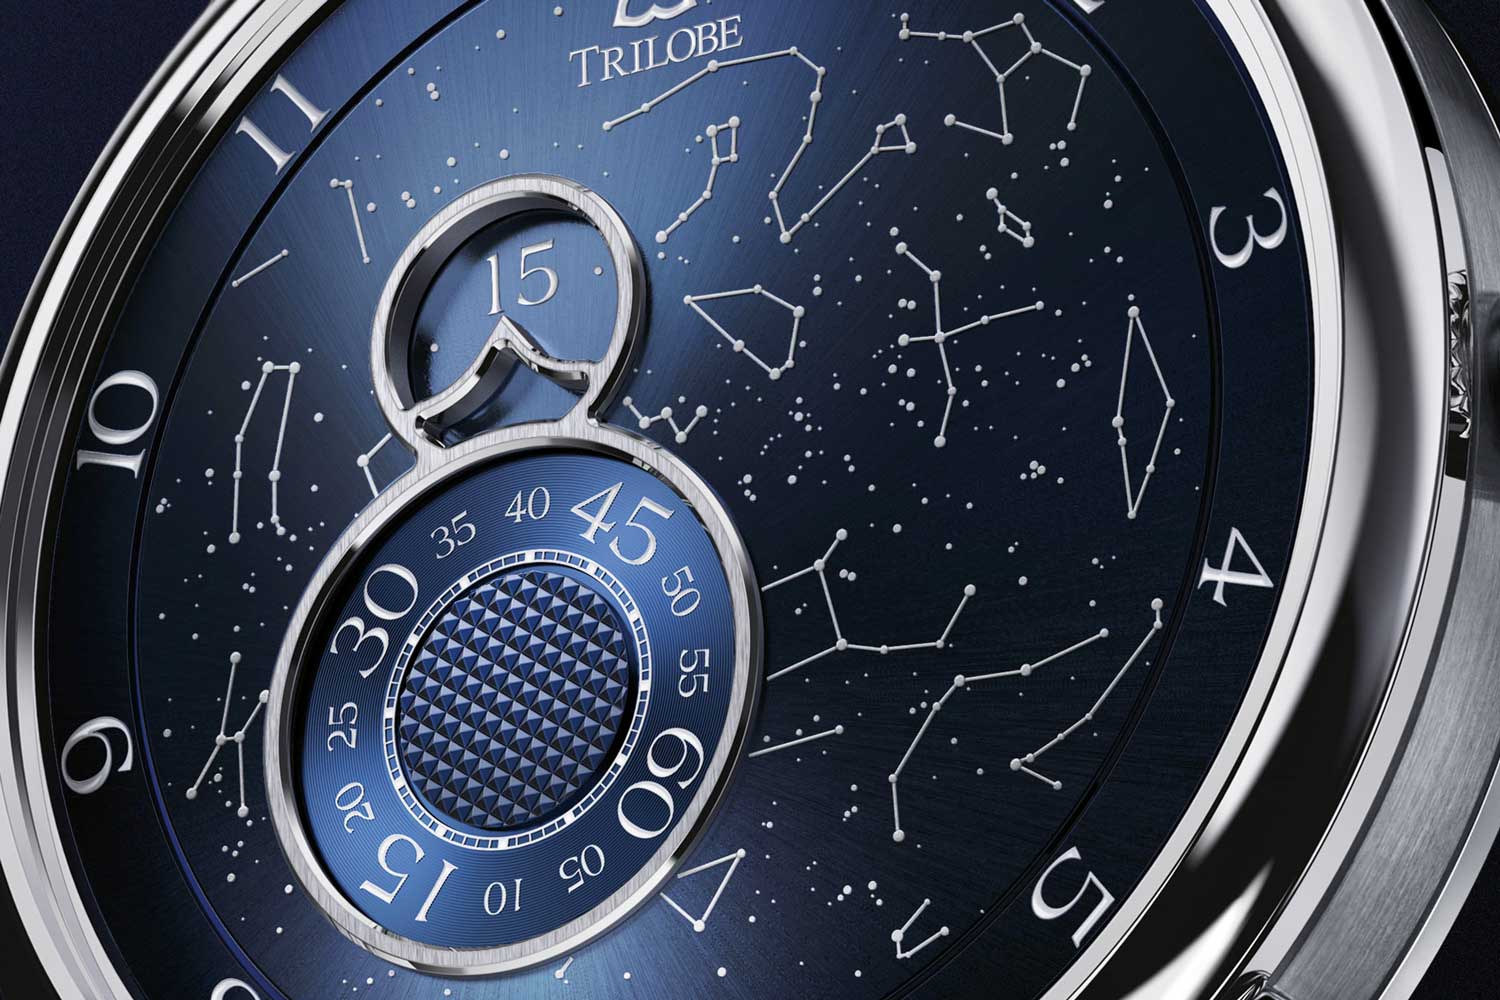 Trilobe invites their customers to personalize their watches by mapping out the stars in the sky at a special moment in time with Nuit Fantastique Secret